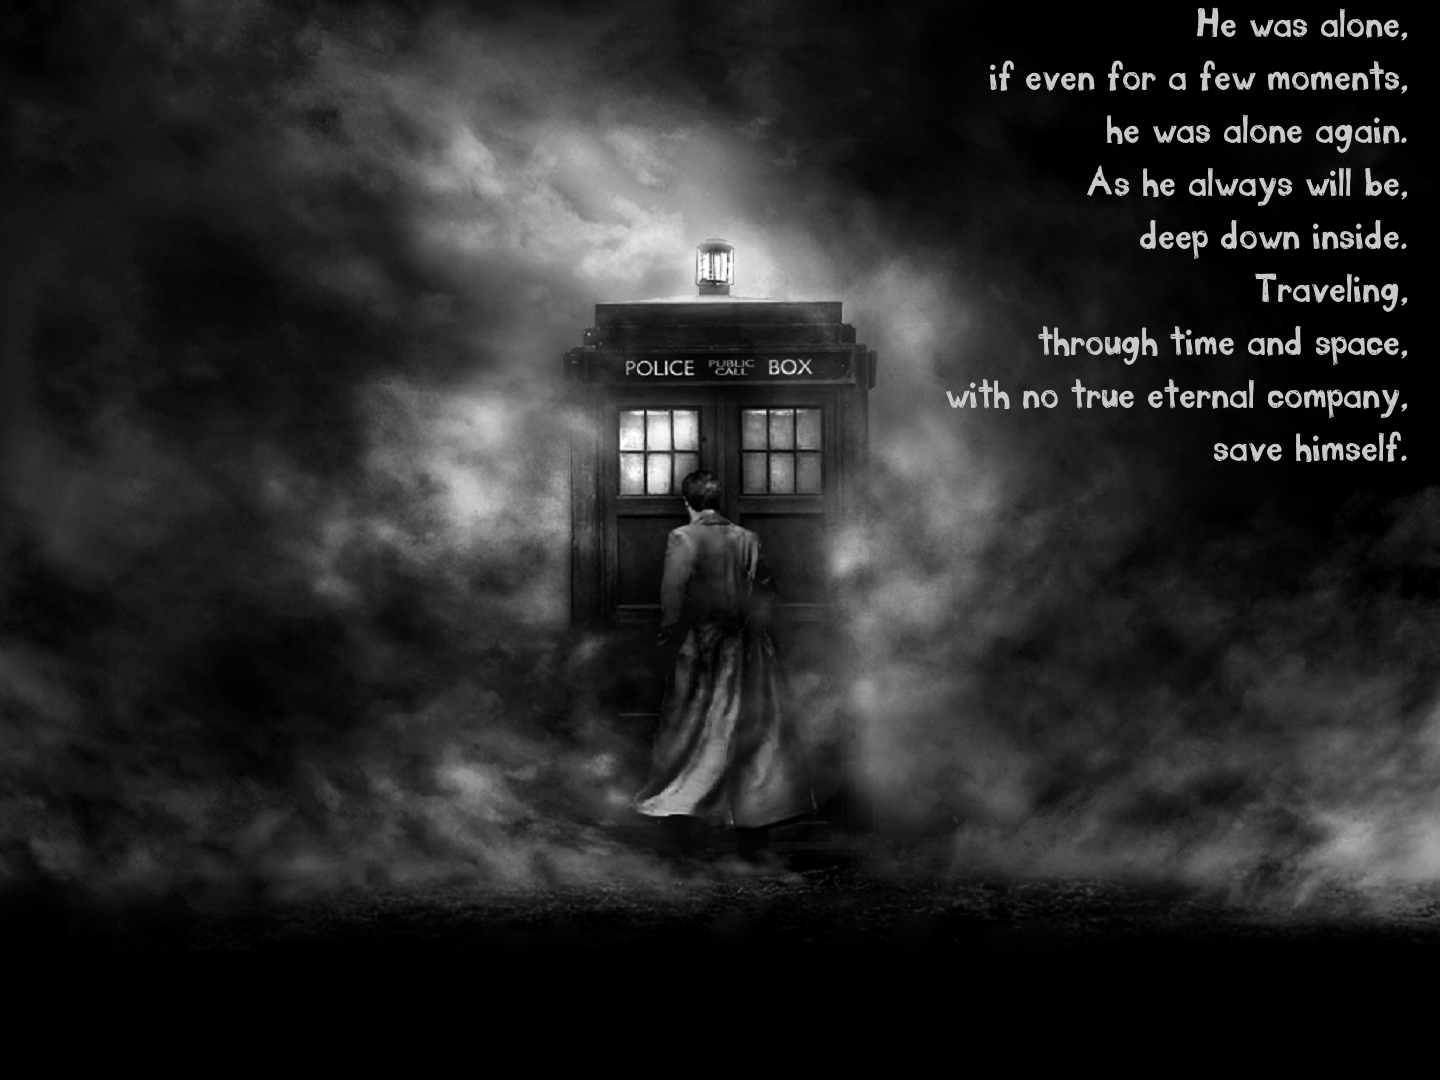 doctor who sad - He was alone, if even for a few moments, he was alone again. As he always will be deep down inside. Traveling, through time and space. with no true eternal company, save himself. Police Box